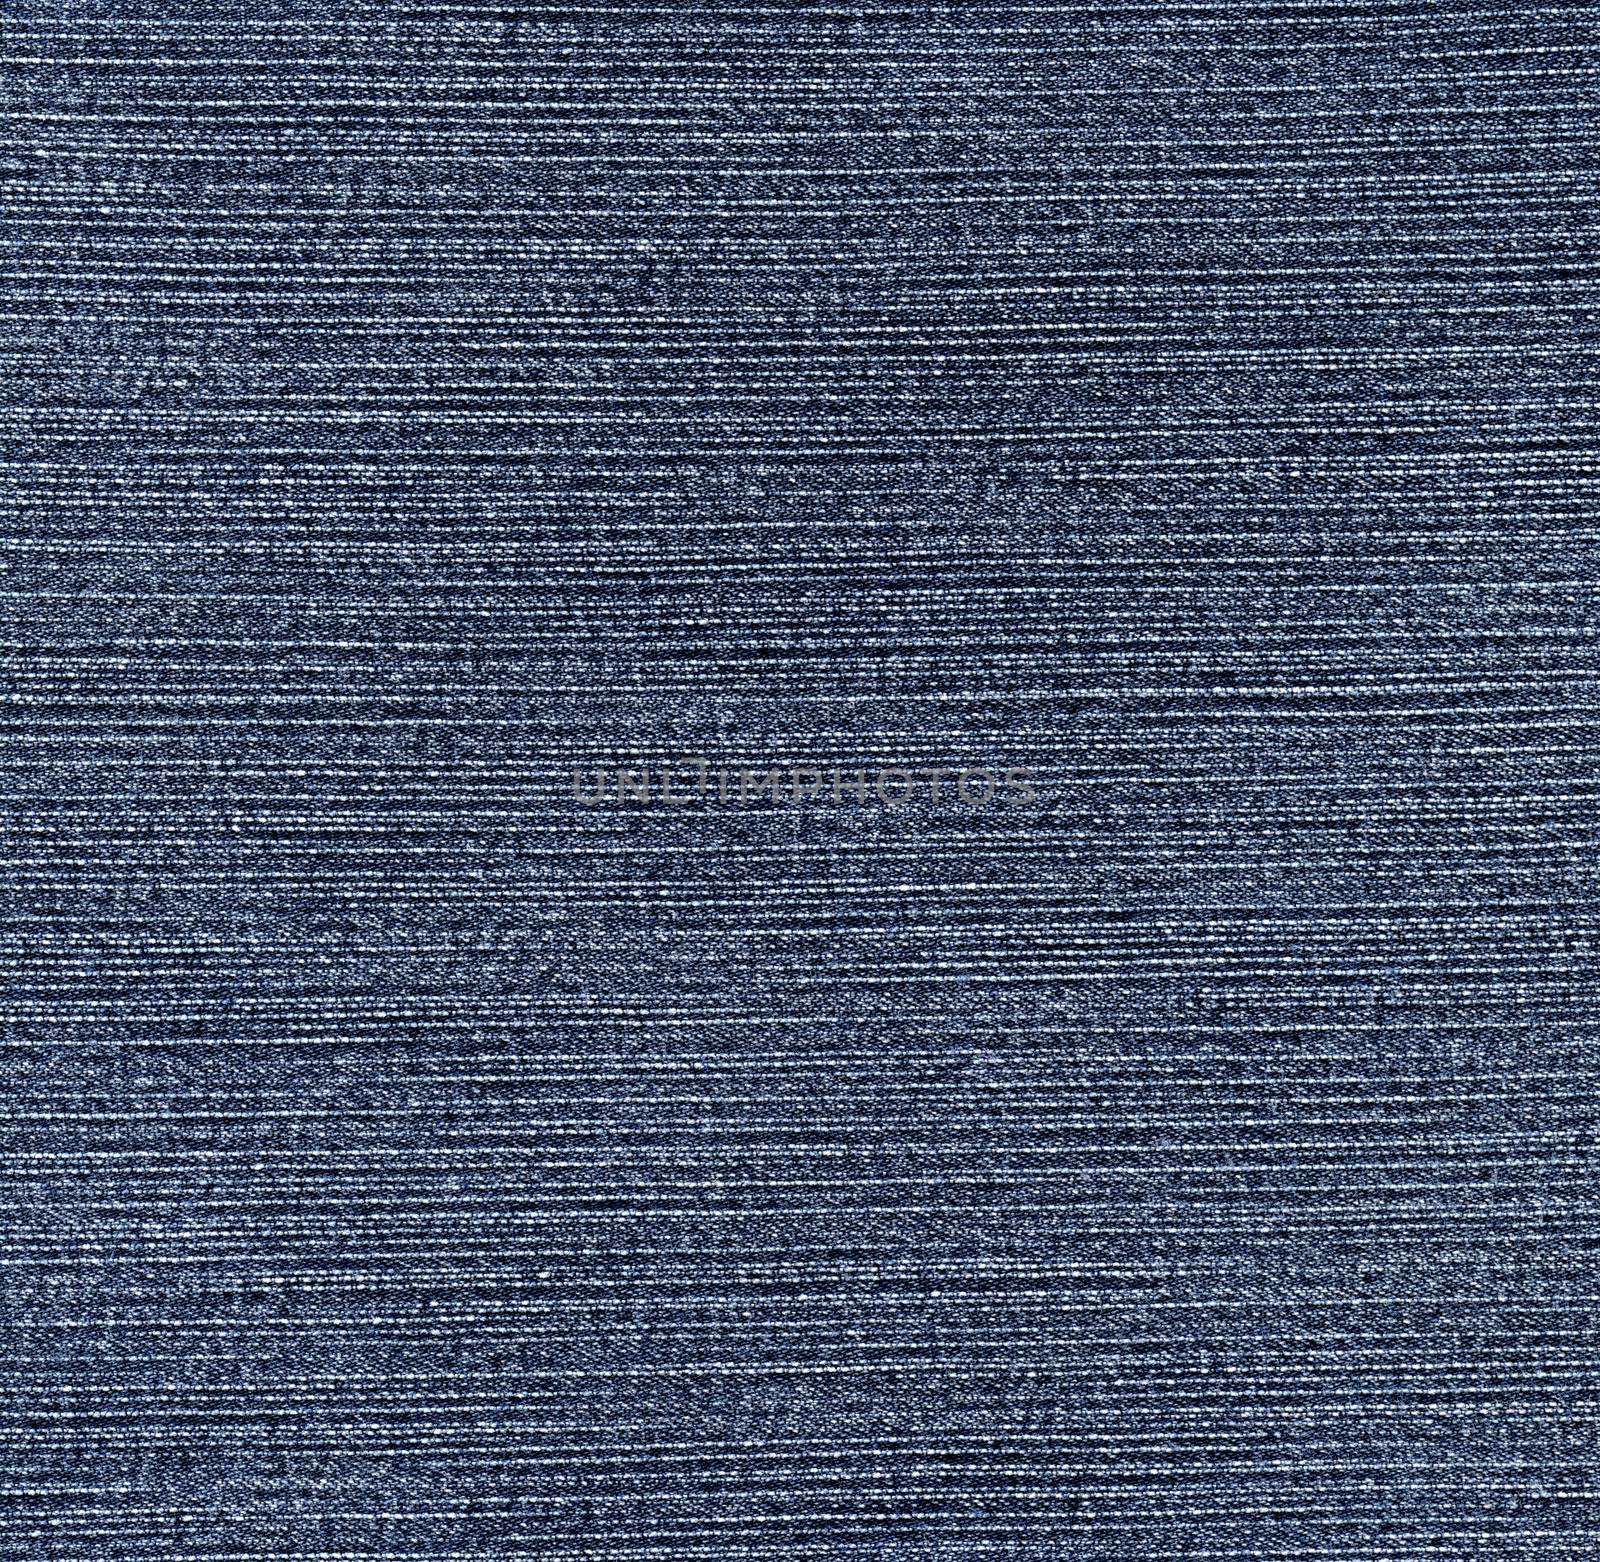 Denim Texture, Light Blue and Grey Jeans Background. by ESSL